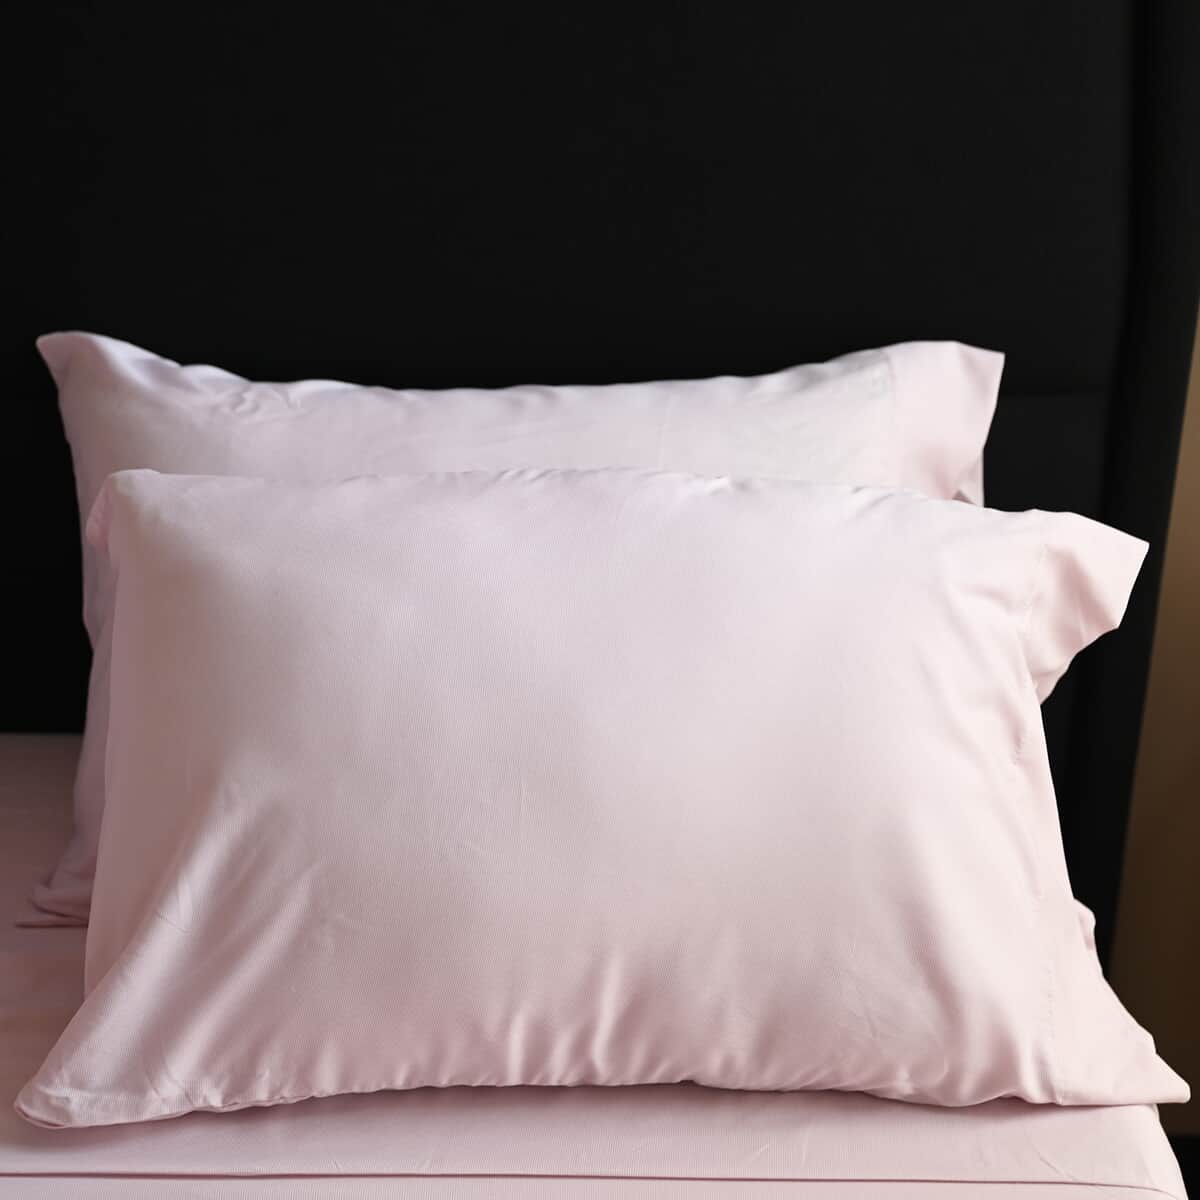 HOMESMART Lilac Copper Infused 6pc Sheet Set with 14 Inches Deep Pocket (30% Copper, 70% Microfiber) - Queen image number 1